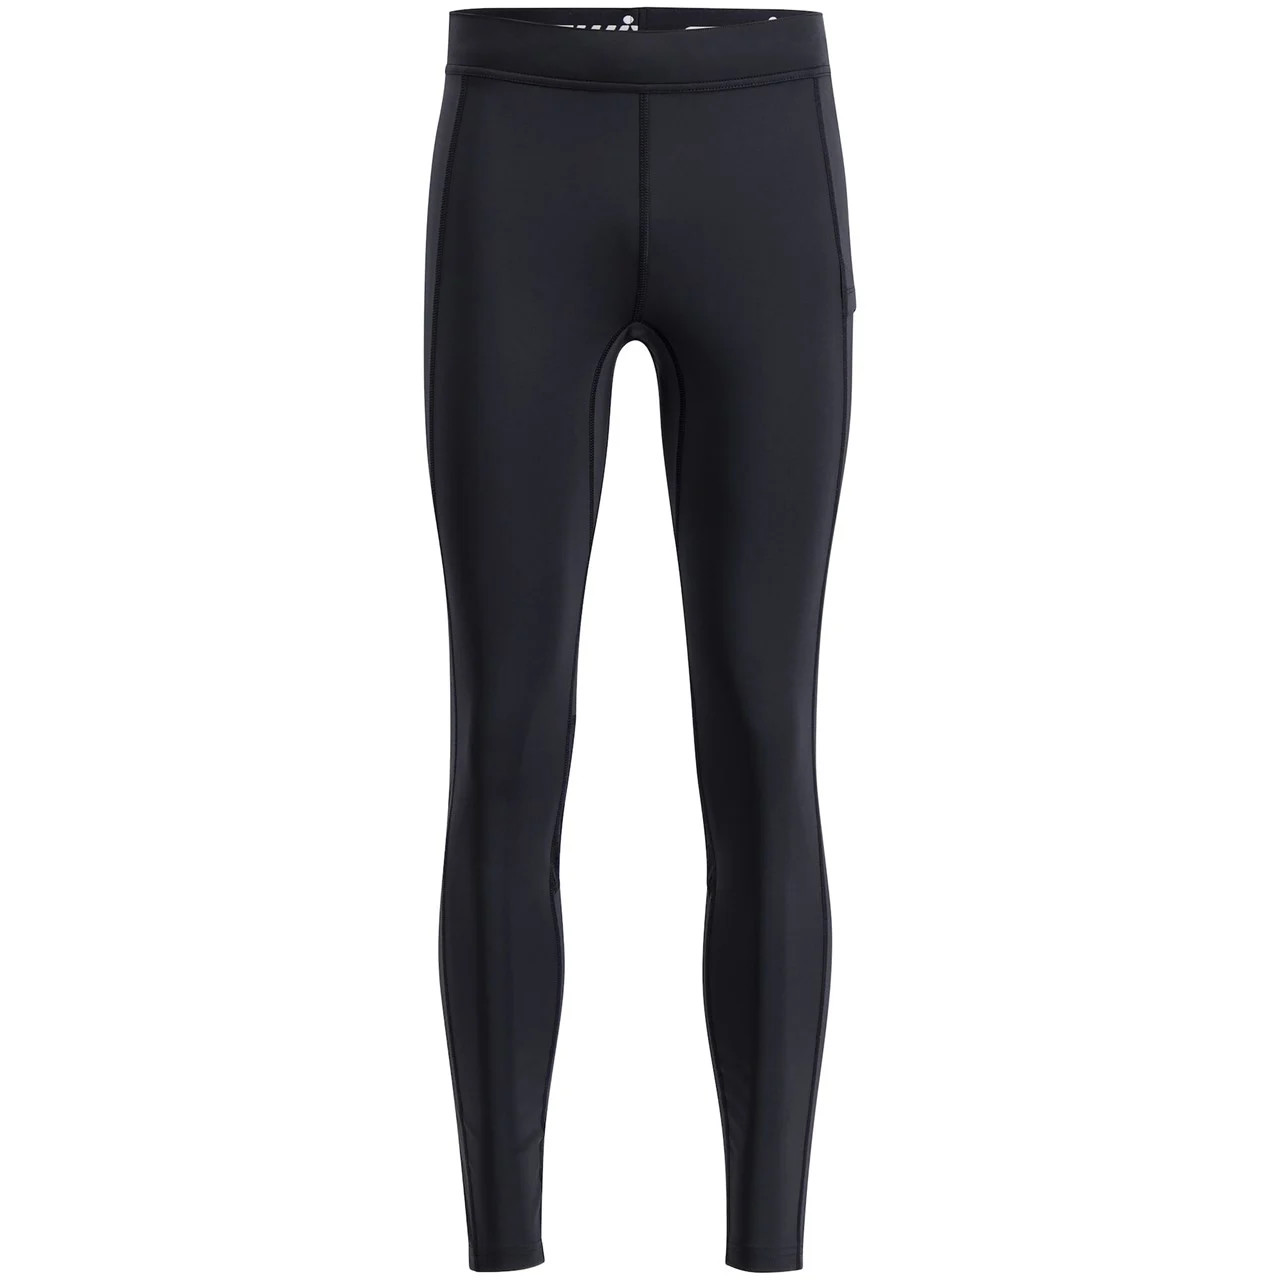 Men's Pace Tights Black